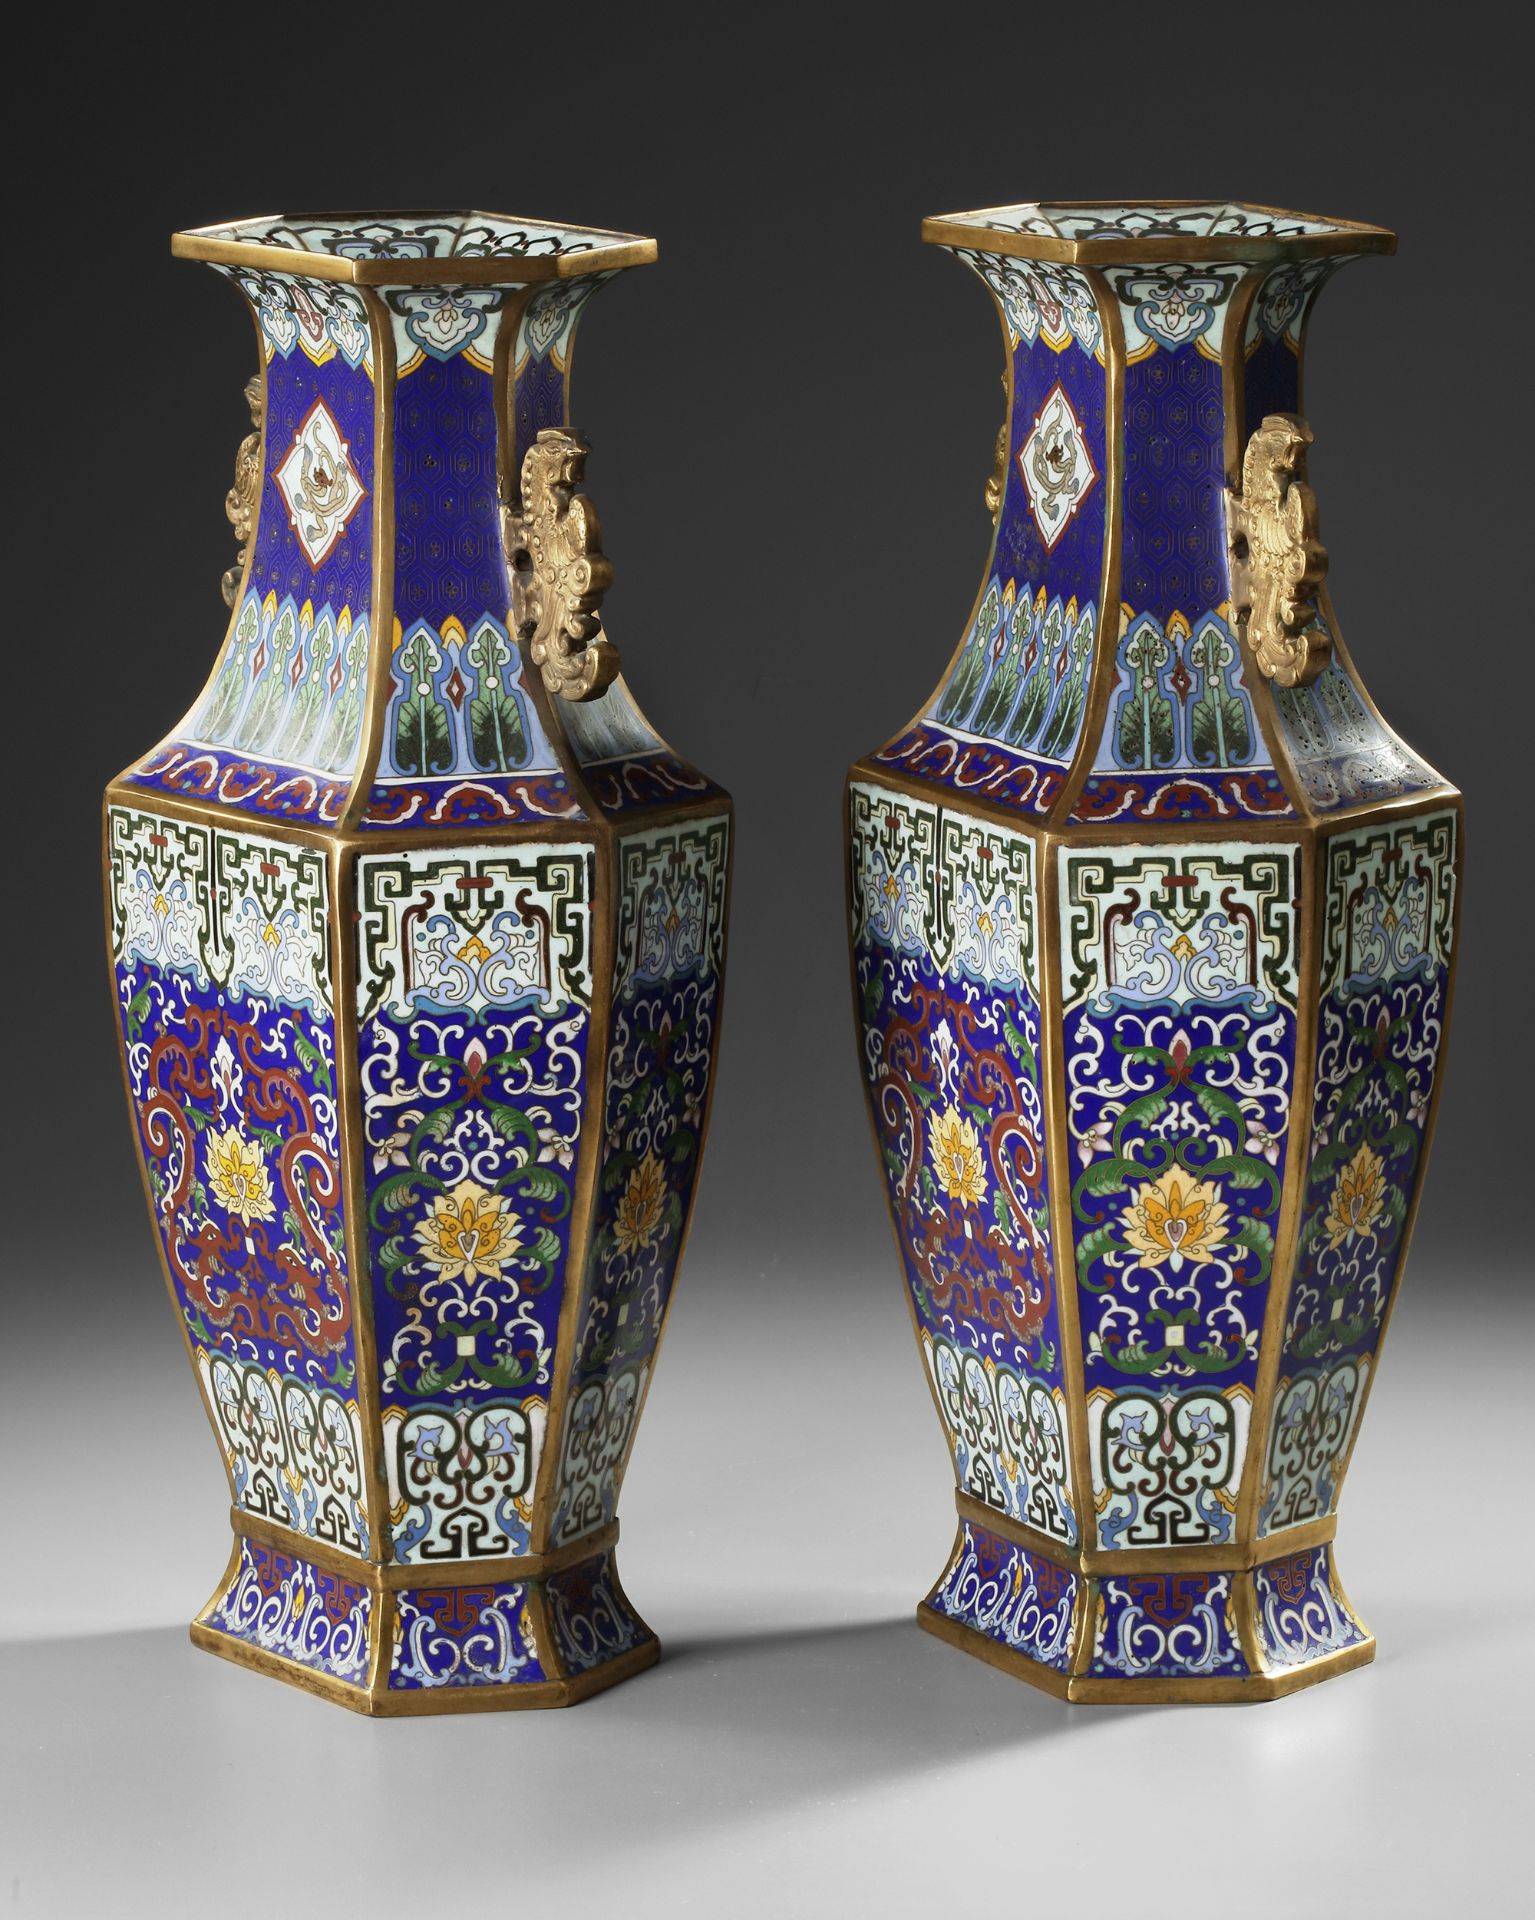 A PAIR OF CHINESE HEXAGONAL ENAMEL CLOISONNÉ VASES, 19TH-20TH CENTURY - Image 2 of 4